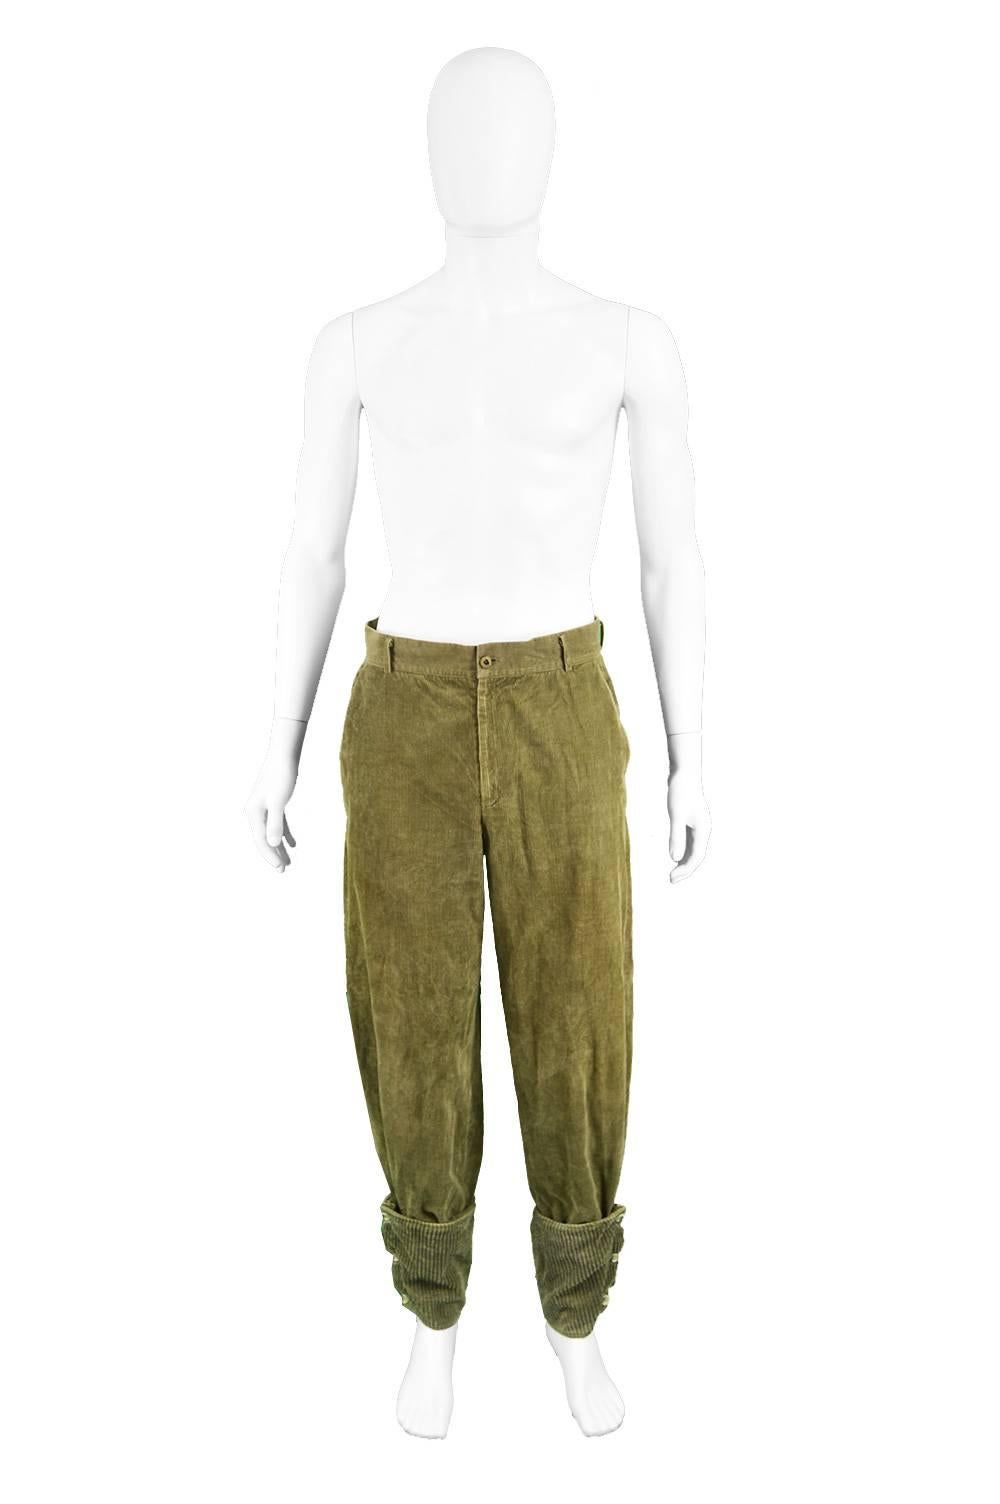 Gianni Versace Men's Green Corduroys Pants with Jumbo Cord Turn Ups, 1980s

Size: Marked 48 which is roughly a men's Small. Please check measurements.
Waist - 30” / 76cm 
Hips - 44”/  112cm
Inside Leg - 30” / 76cm 
Rise - 13” / 33cm

Condition: